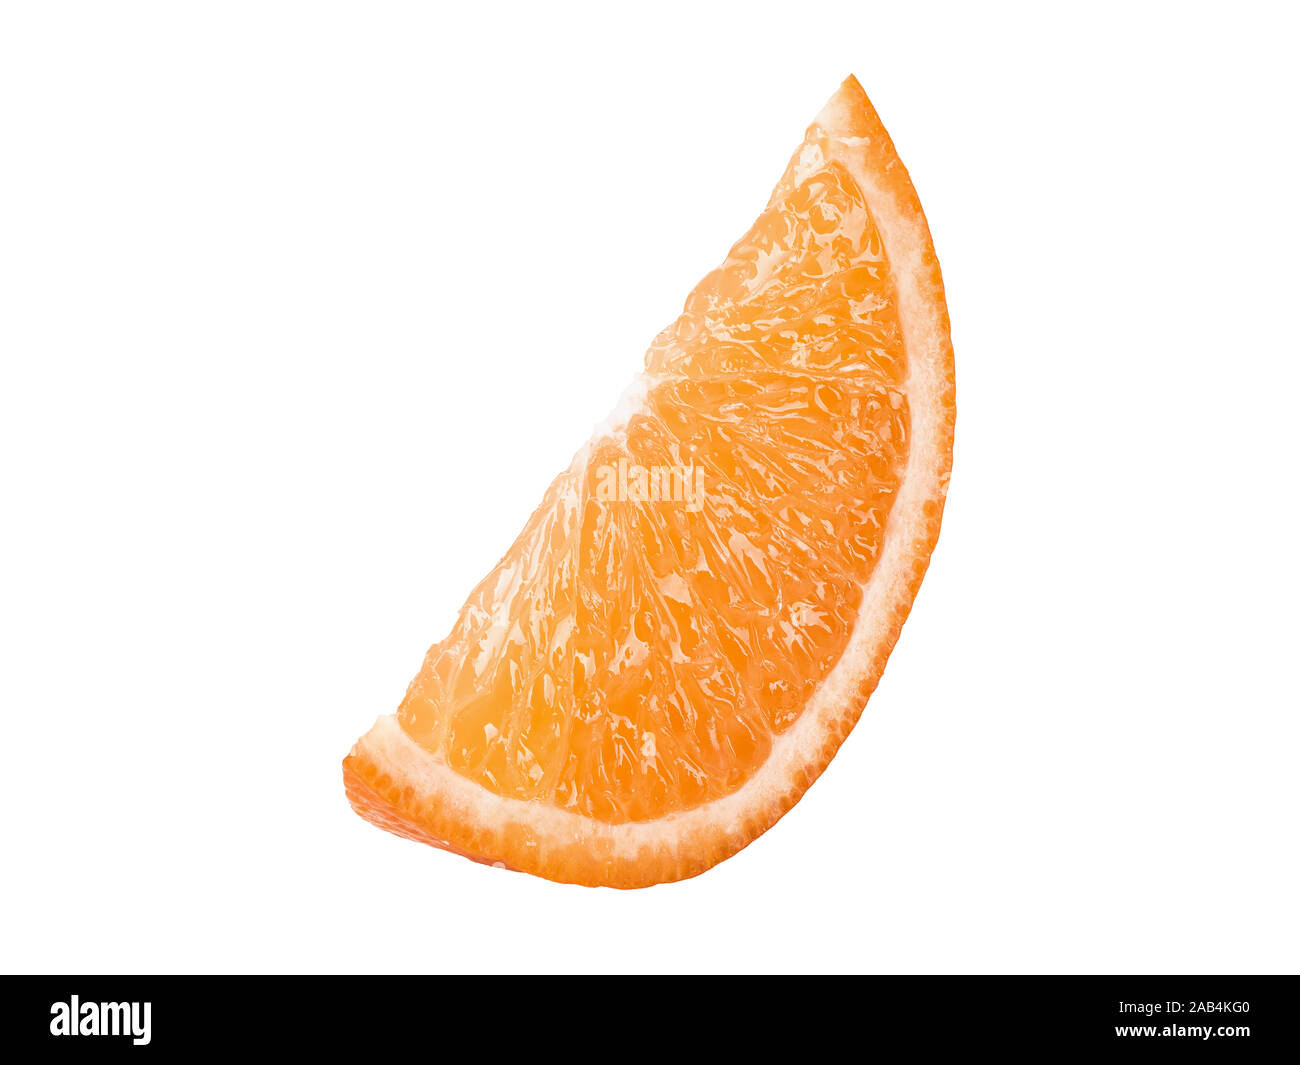 Slice of a ripe orange isolated on white background with copy space for text or images. Fruit with juicy flesh. Side view. Close-up shot. Stock Photo